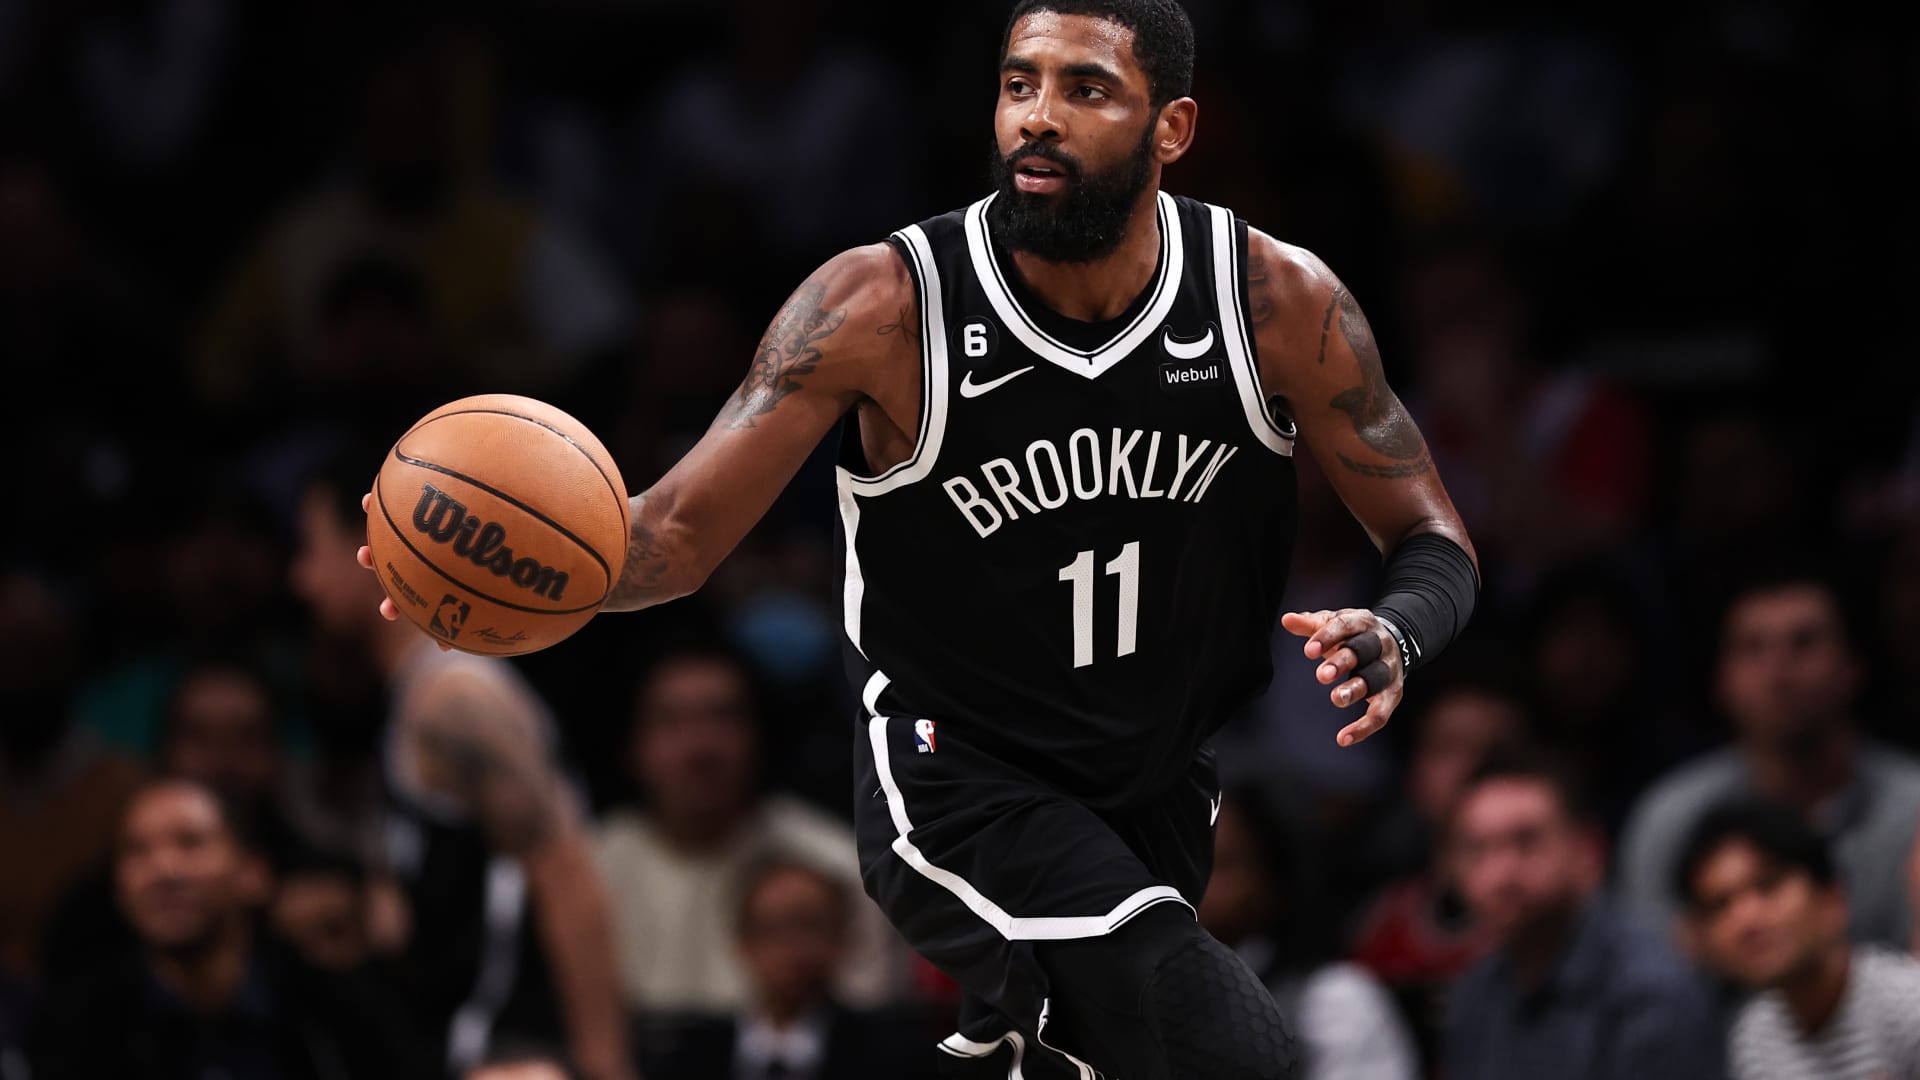 Kyrie Irving #11 of the Brooklyn Nets brings the ball up the court during the fourth quarter of the game against the Chicago Bulls at Barclays Center on November 01, 2022 in New York City.